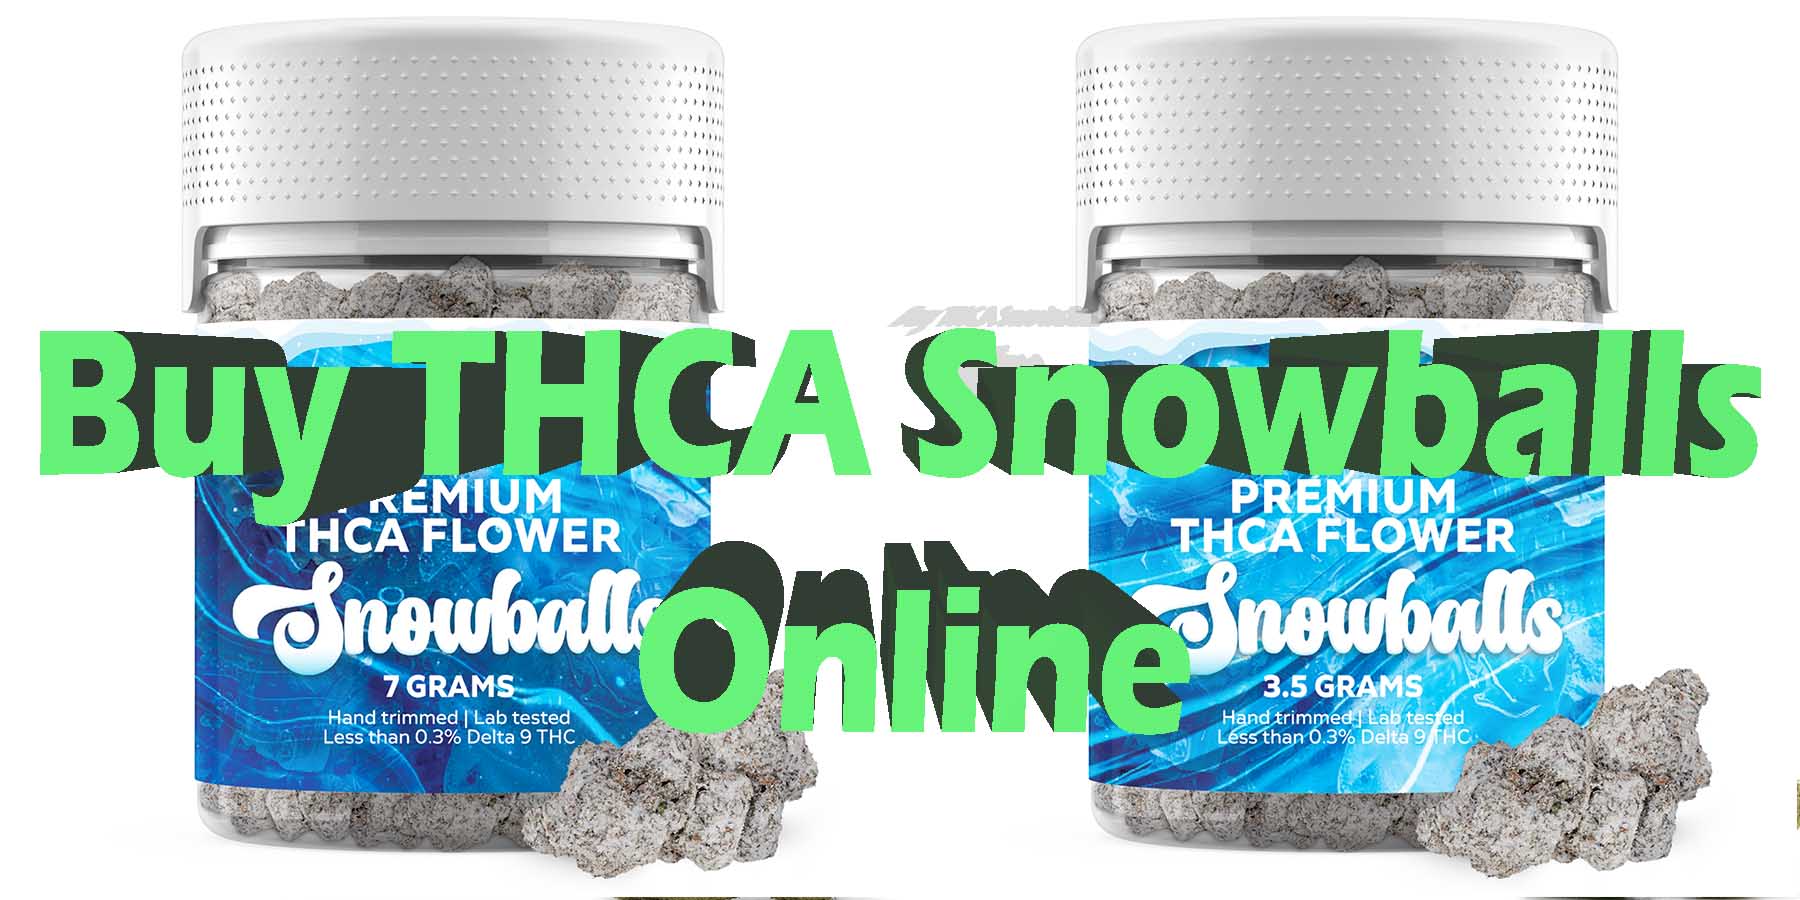 Where are THCA Snowballs Legal THC LowestPrice Coupon Discount For Smoking Best High Smoke Shop Online Near Me Online Smoke Shop StrongestBrand Best Smoke Best Price Bloomz